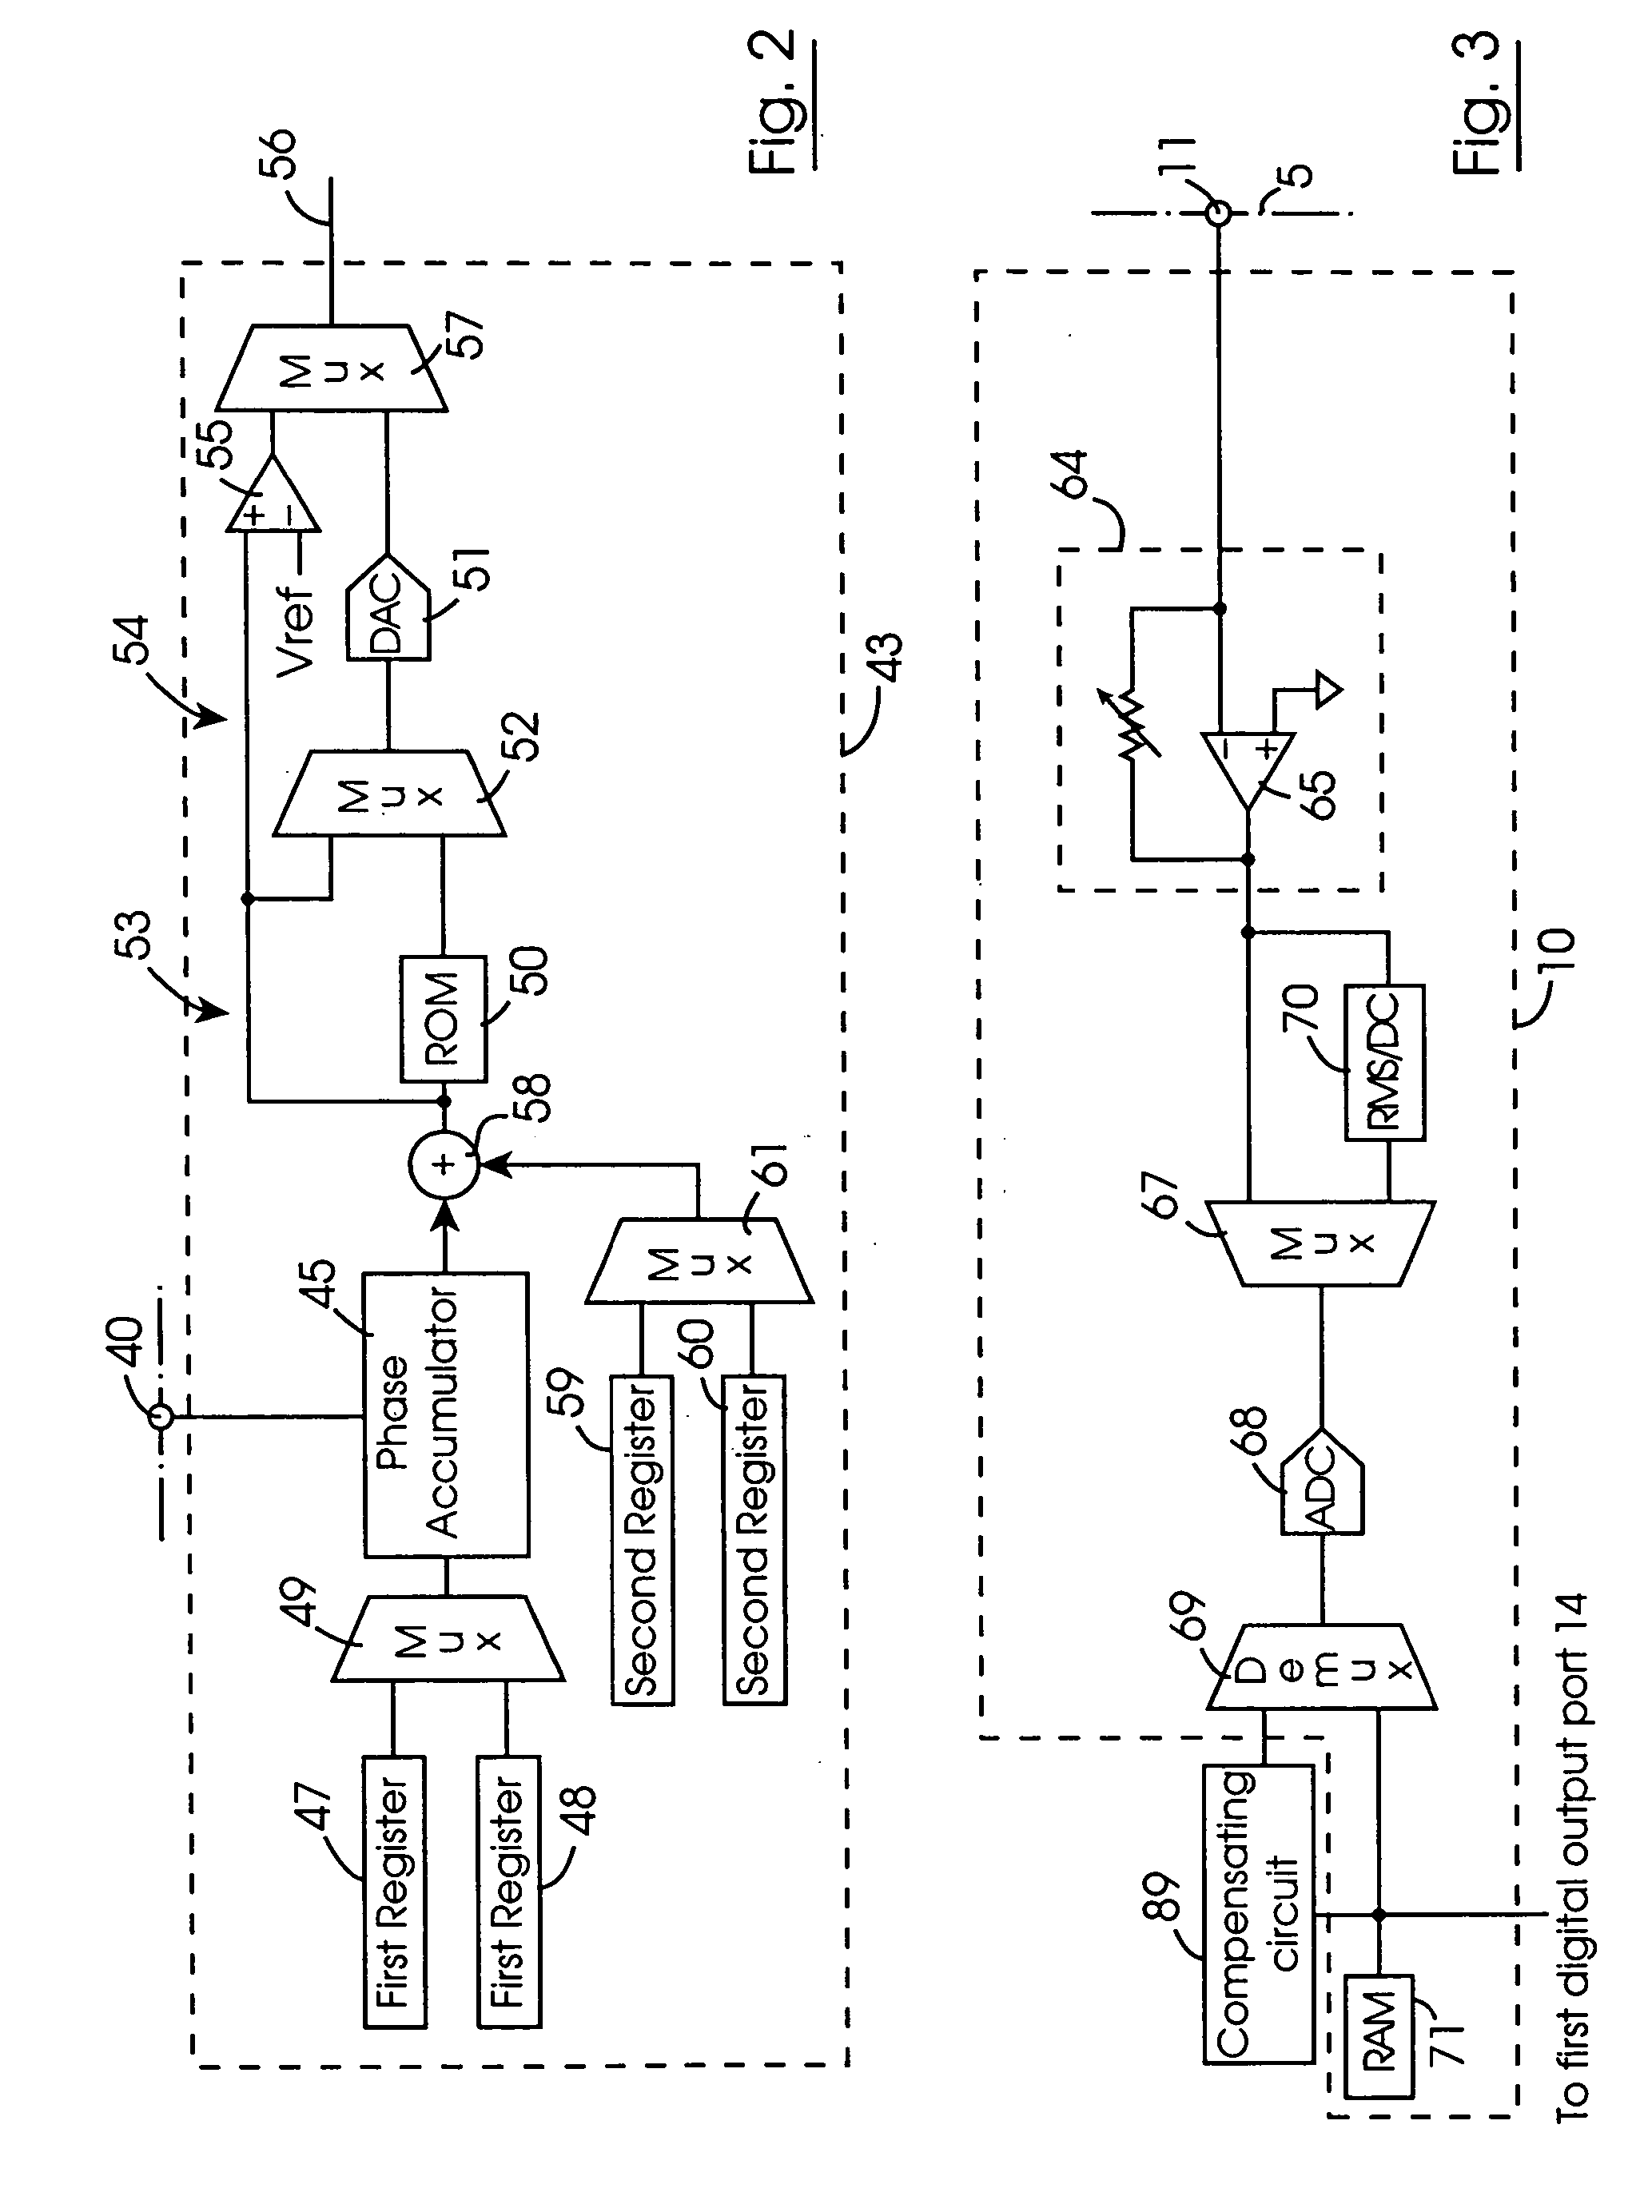 Measuring circuit and a method for determining a characteristic of the impedance of a complex impedance element for facilitating characterization of the impedance thereof